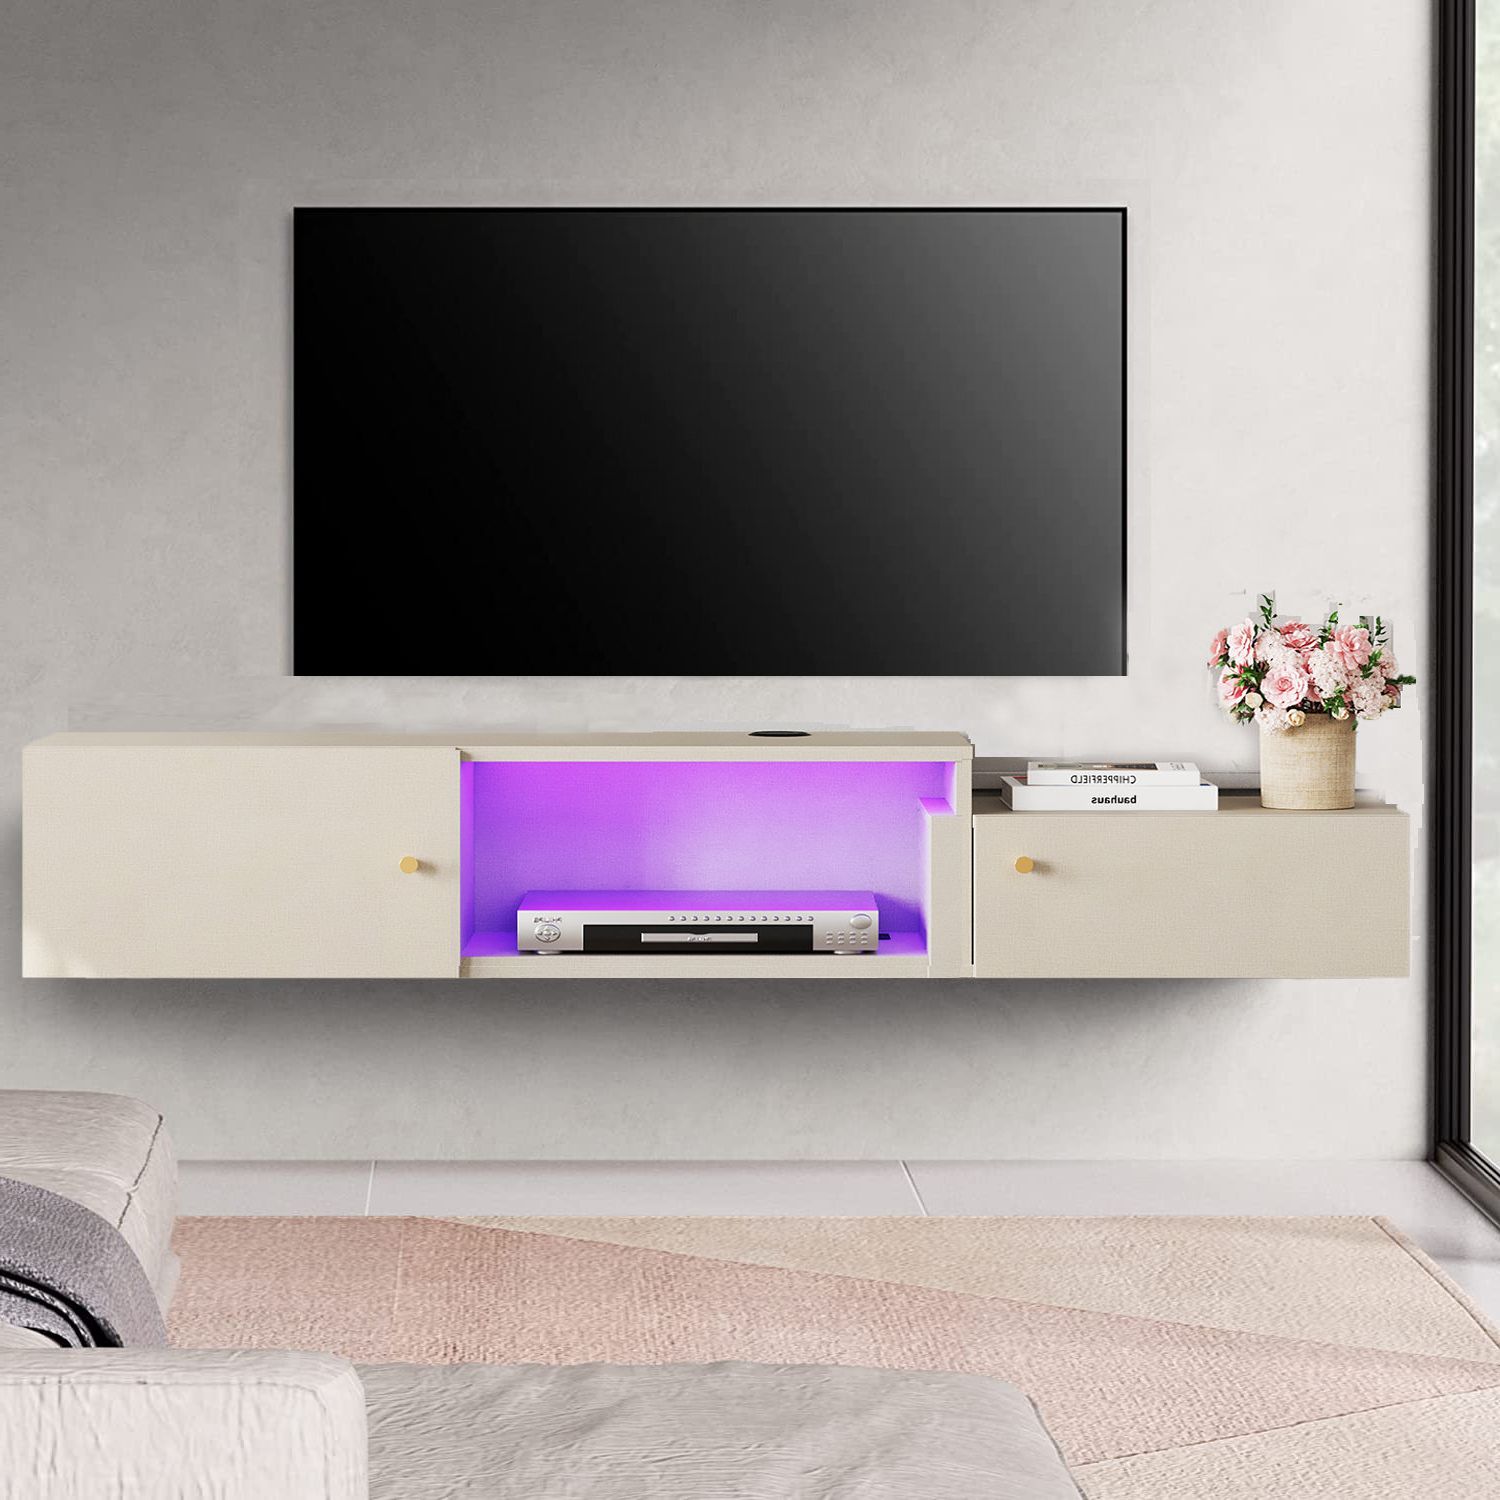 Wrought Studio Bobbi Floating Tv Stand For Tvs Up To 88" | Wayfair For Floating Stands For Tvs (Gallery 7 of 20)